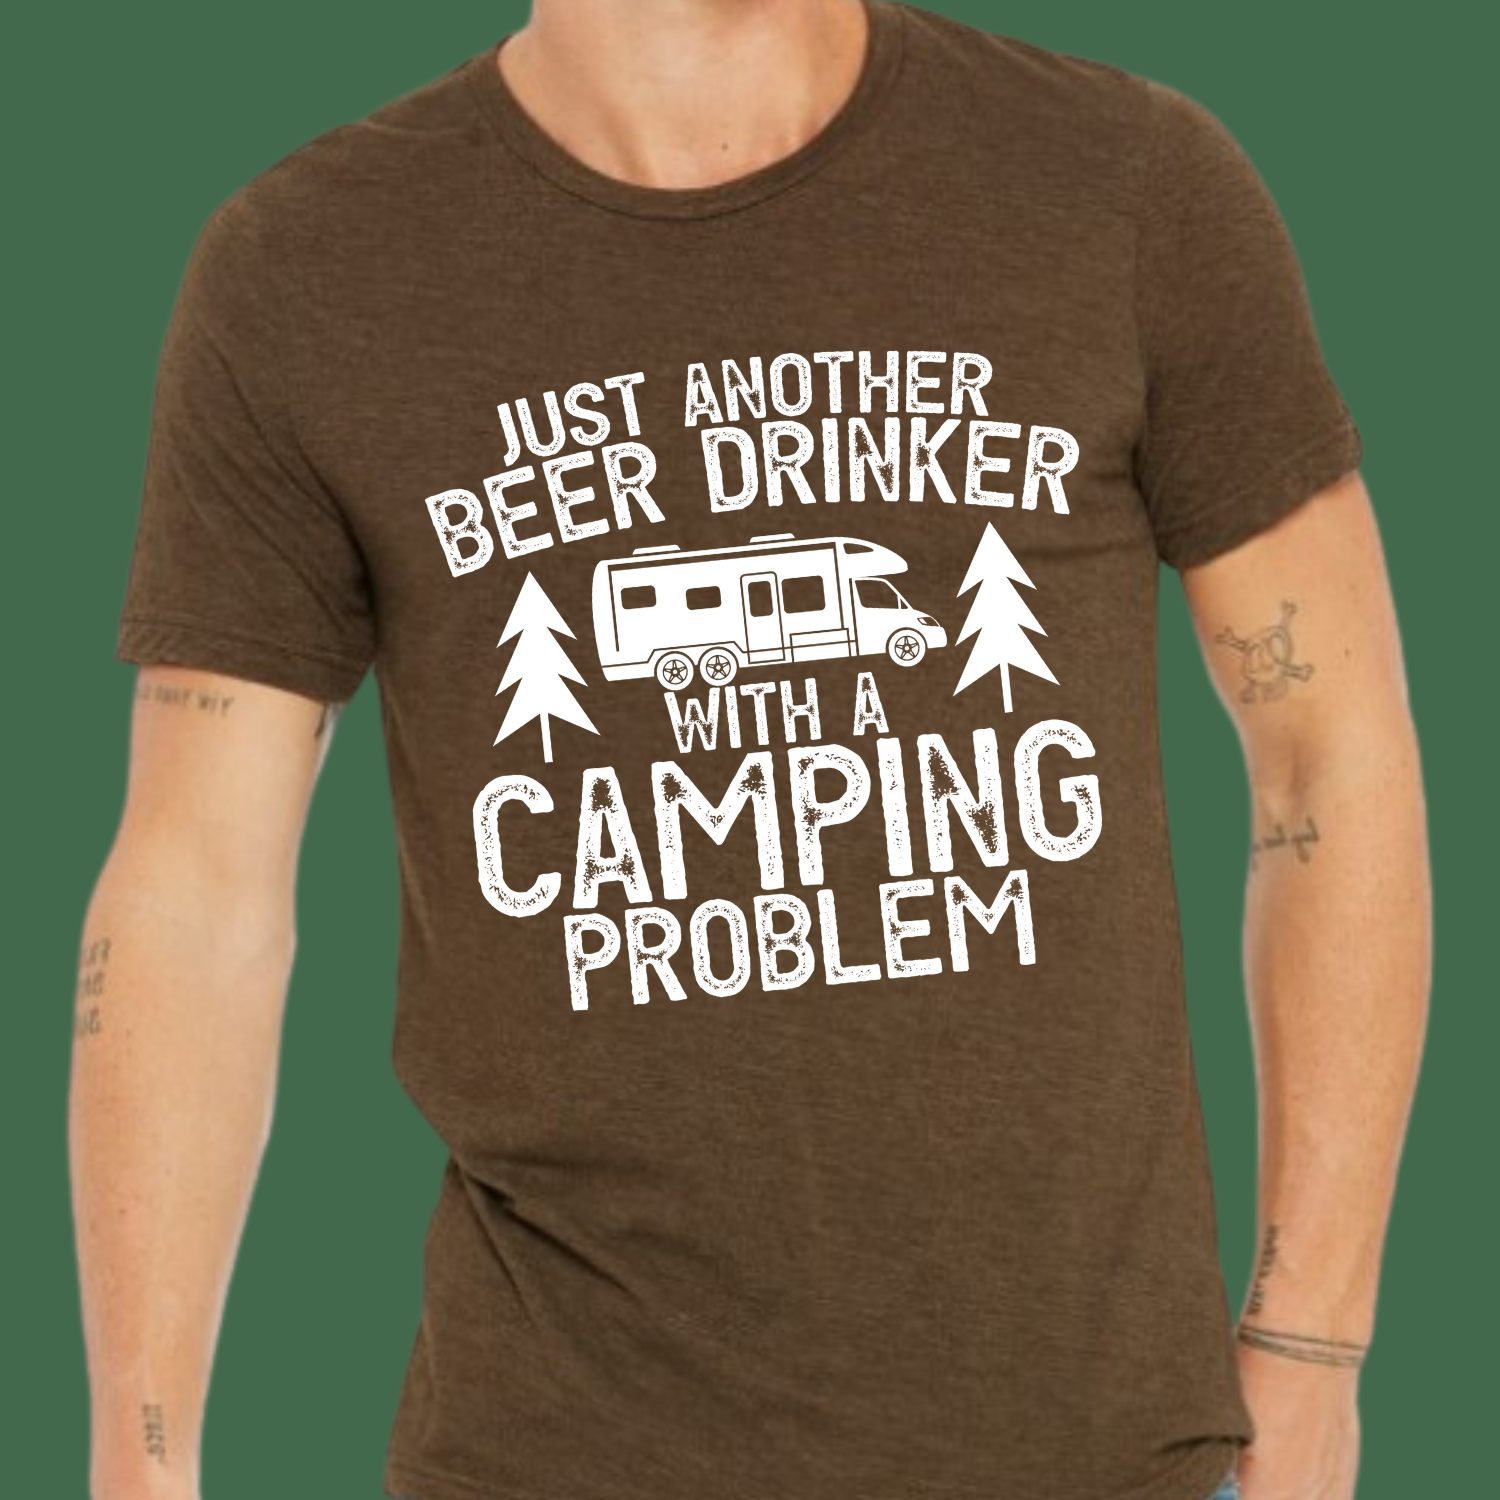 Just Another Beer Drinker with a Camping Problem Shirt